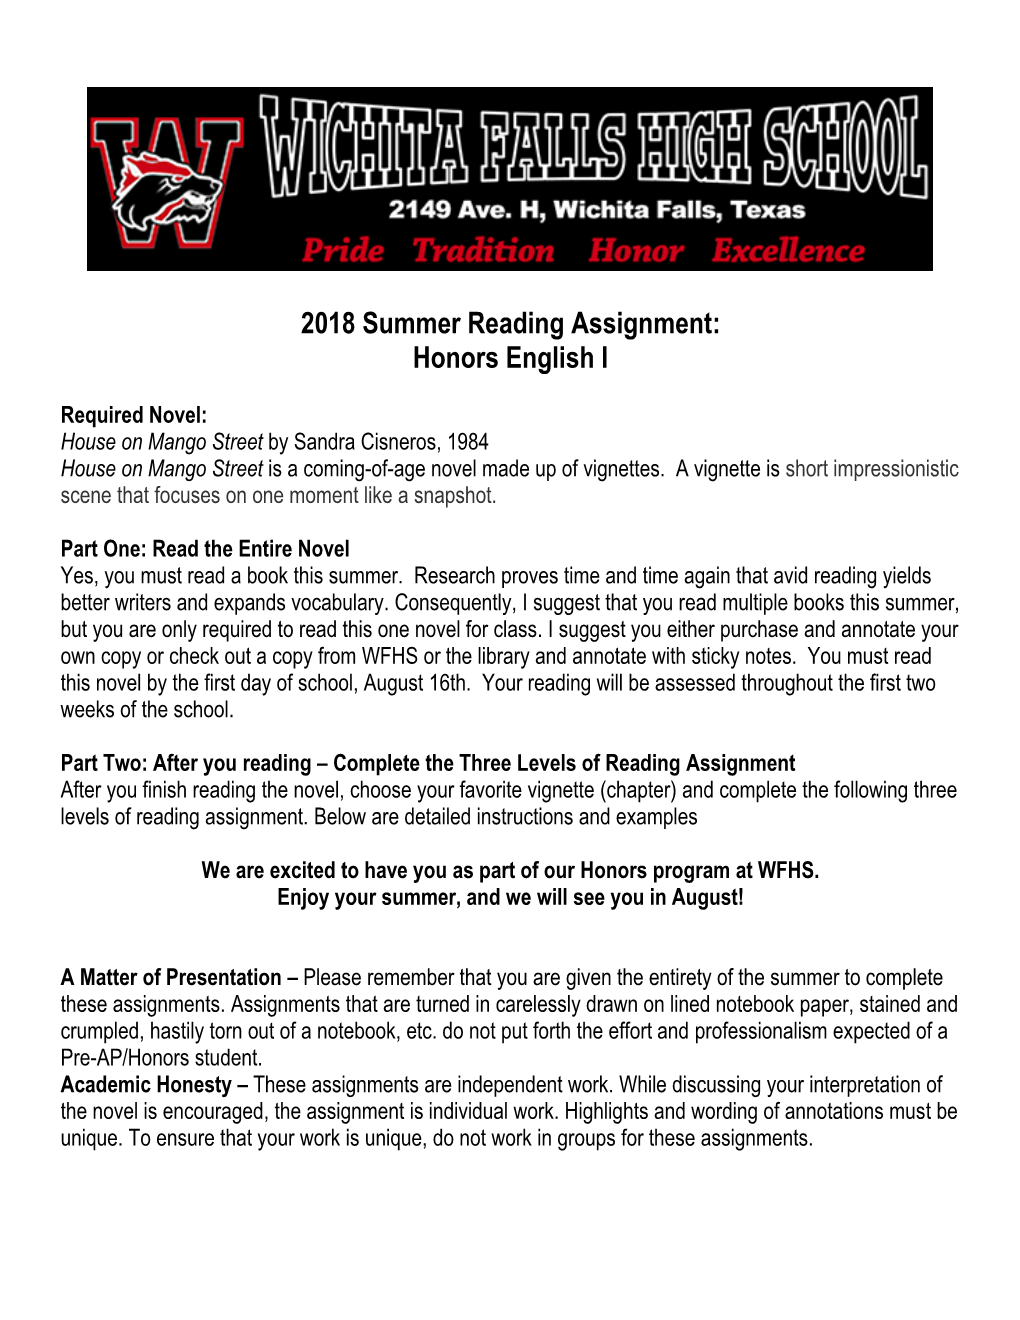 2018 Summer Reading Assignment: Honors English I